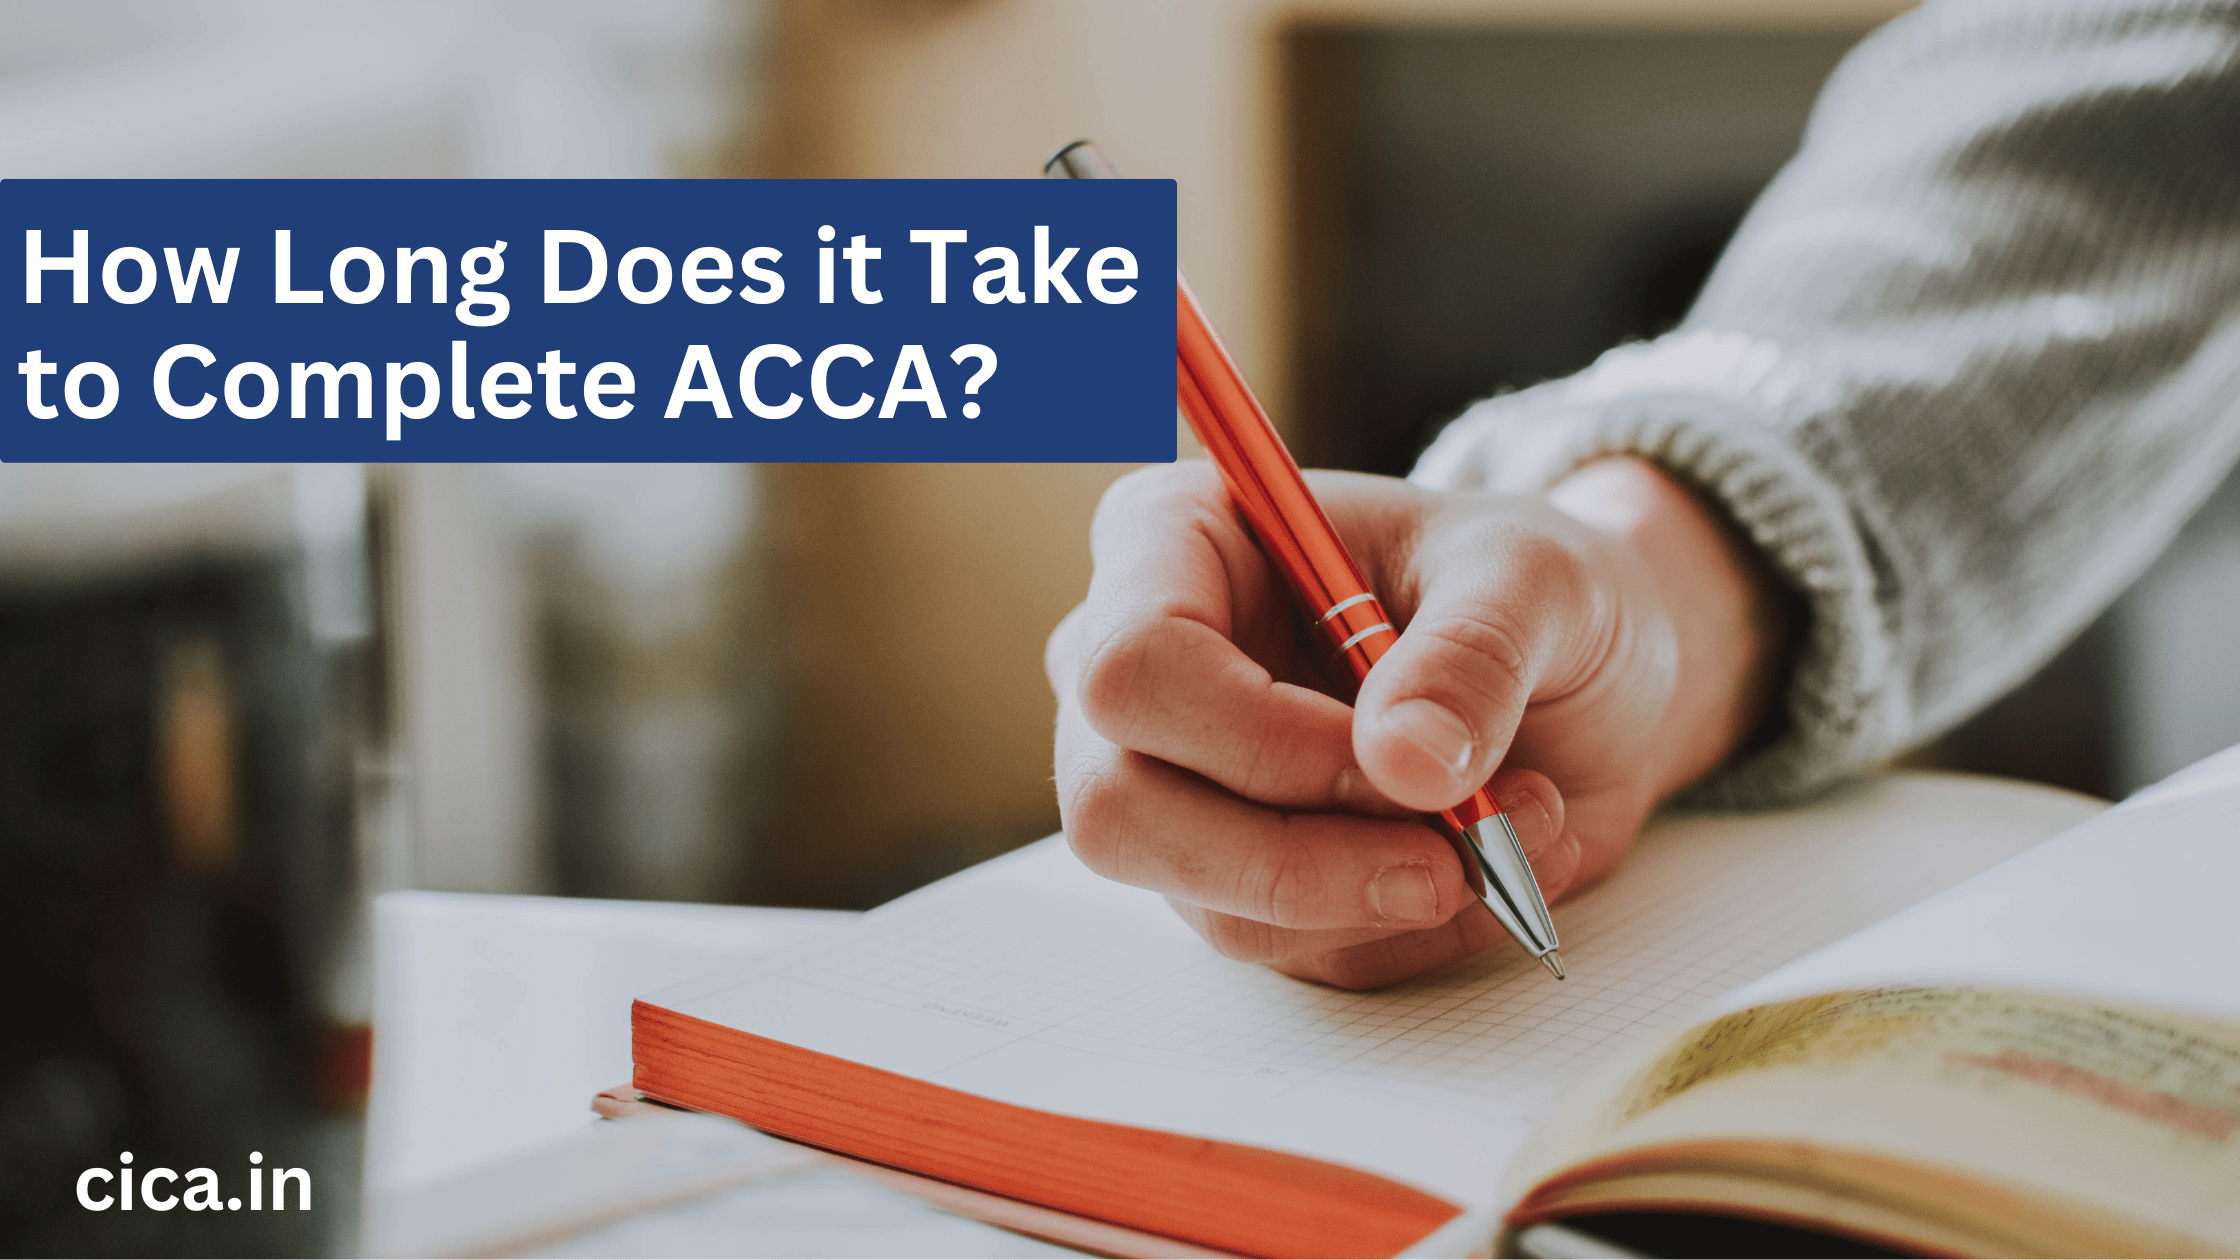 How Long Does it Take to Complete ACCA?